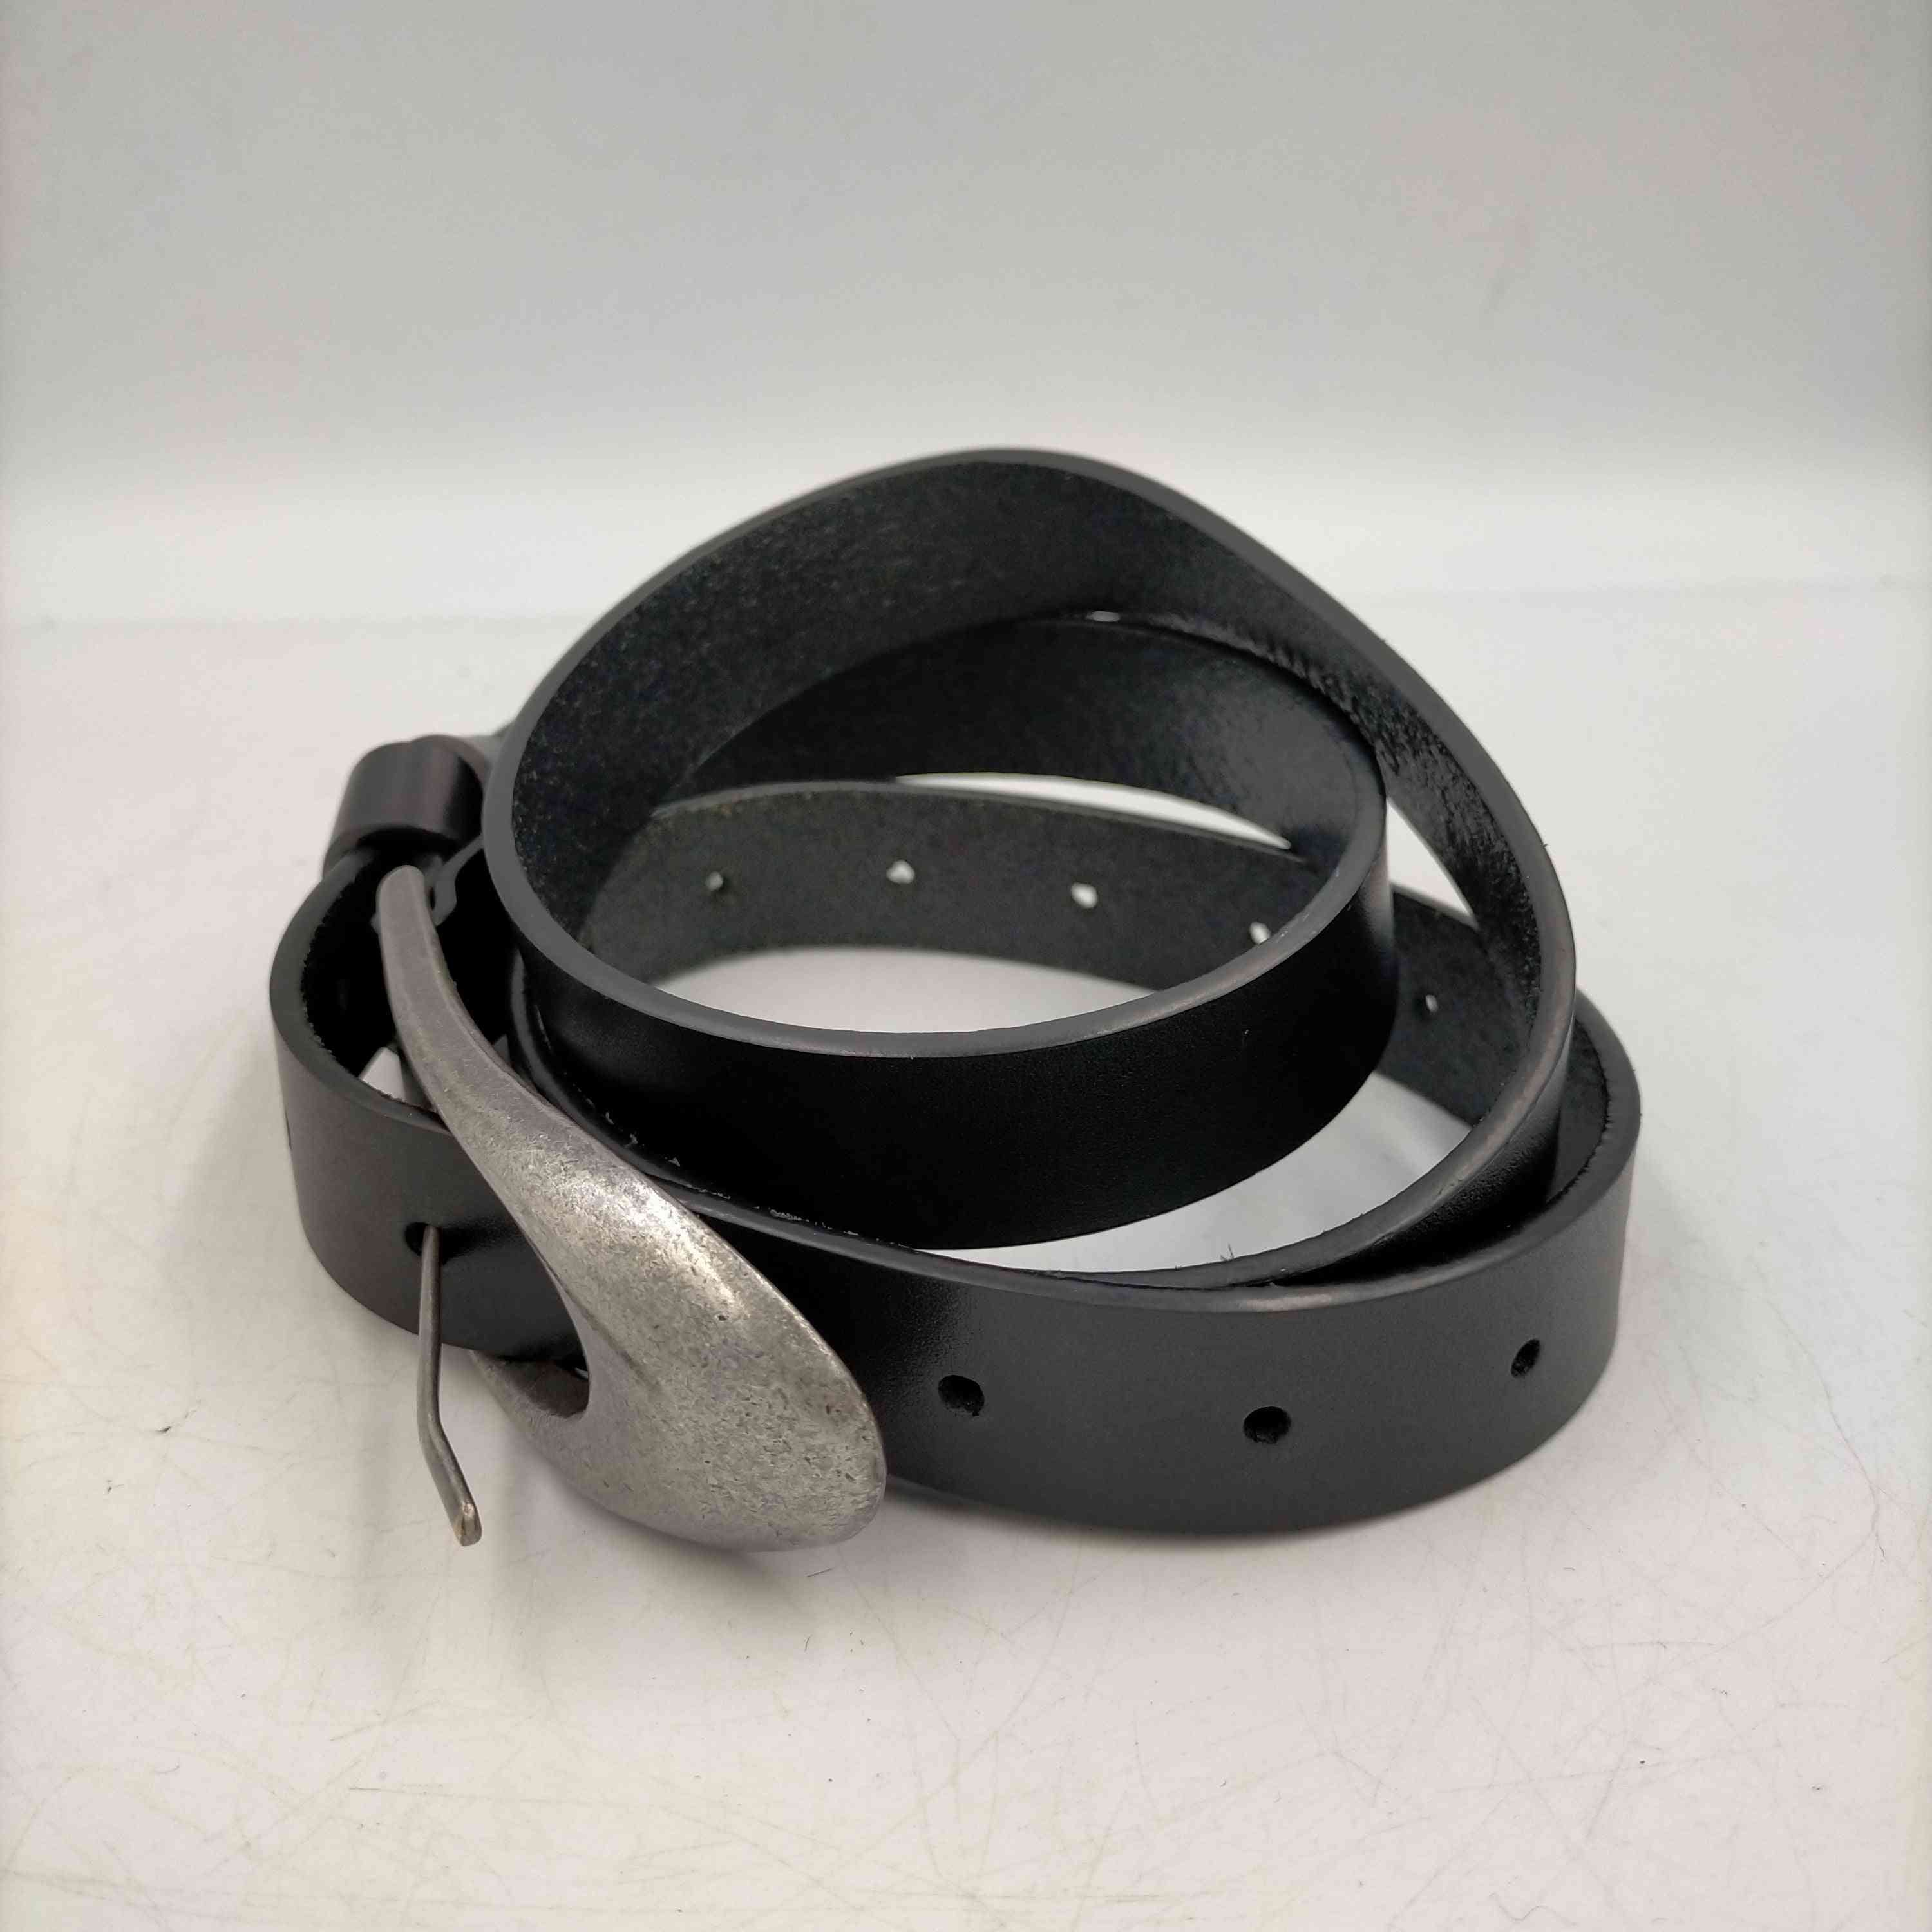 fax copy express Belt With Irregular Metal Buckle メンズ FREE